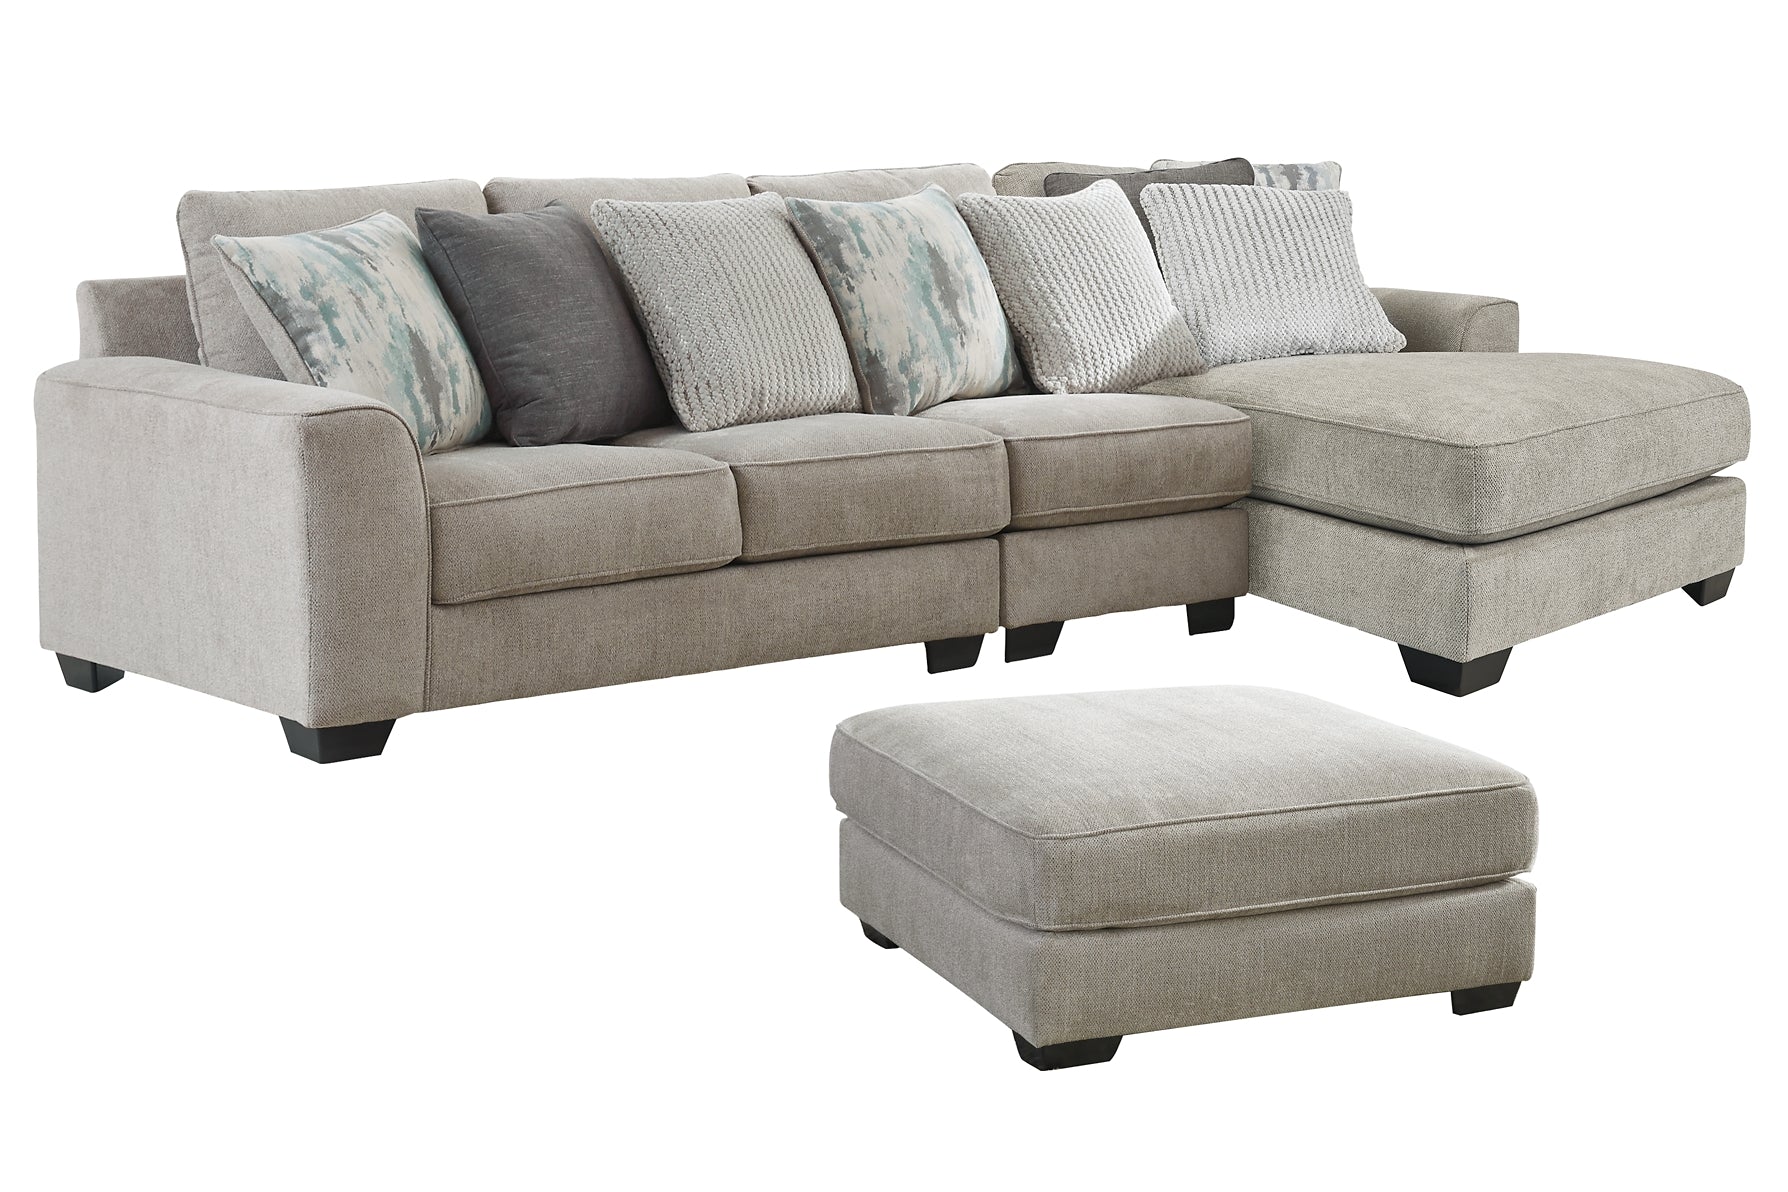 Ardsley 3-Piece Sectional with Ottoman Benchcraft®